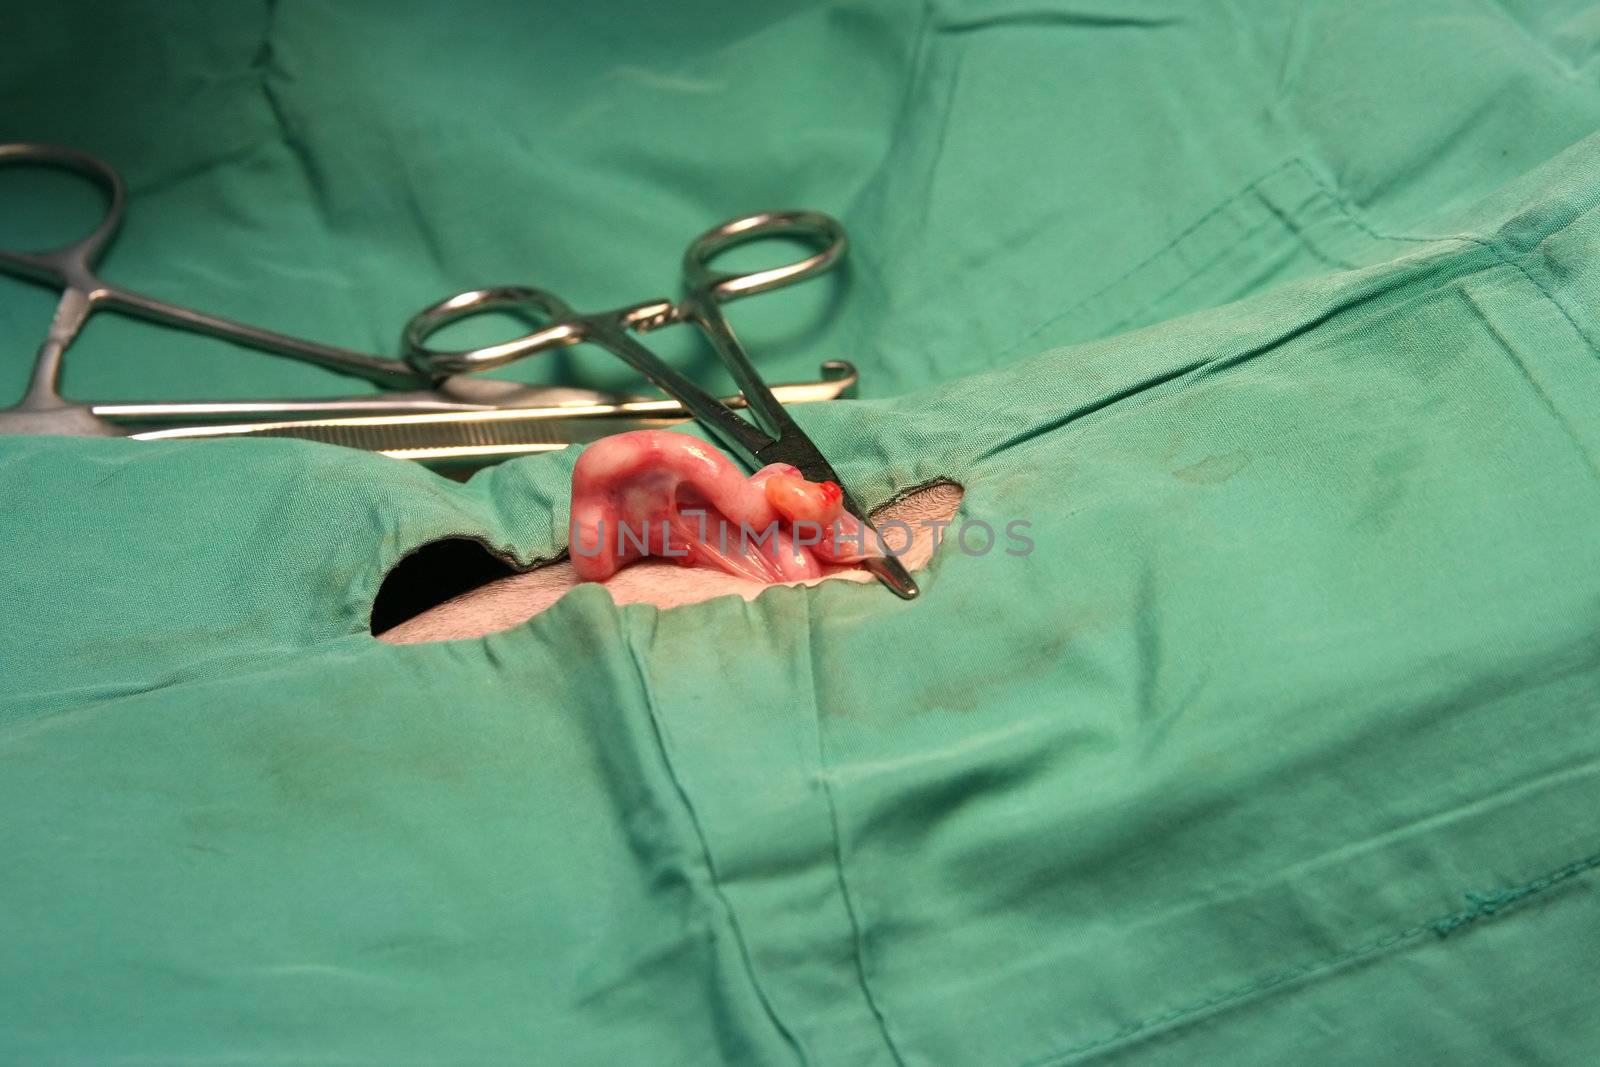 An organ clipped of during surgery